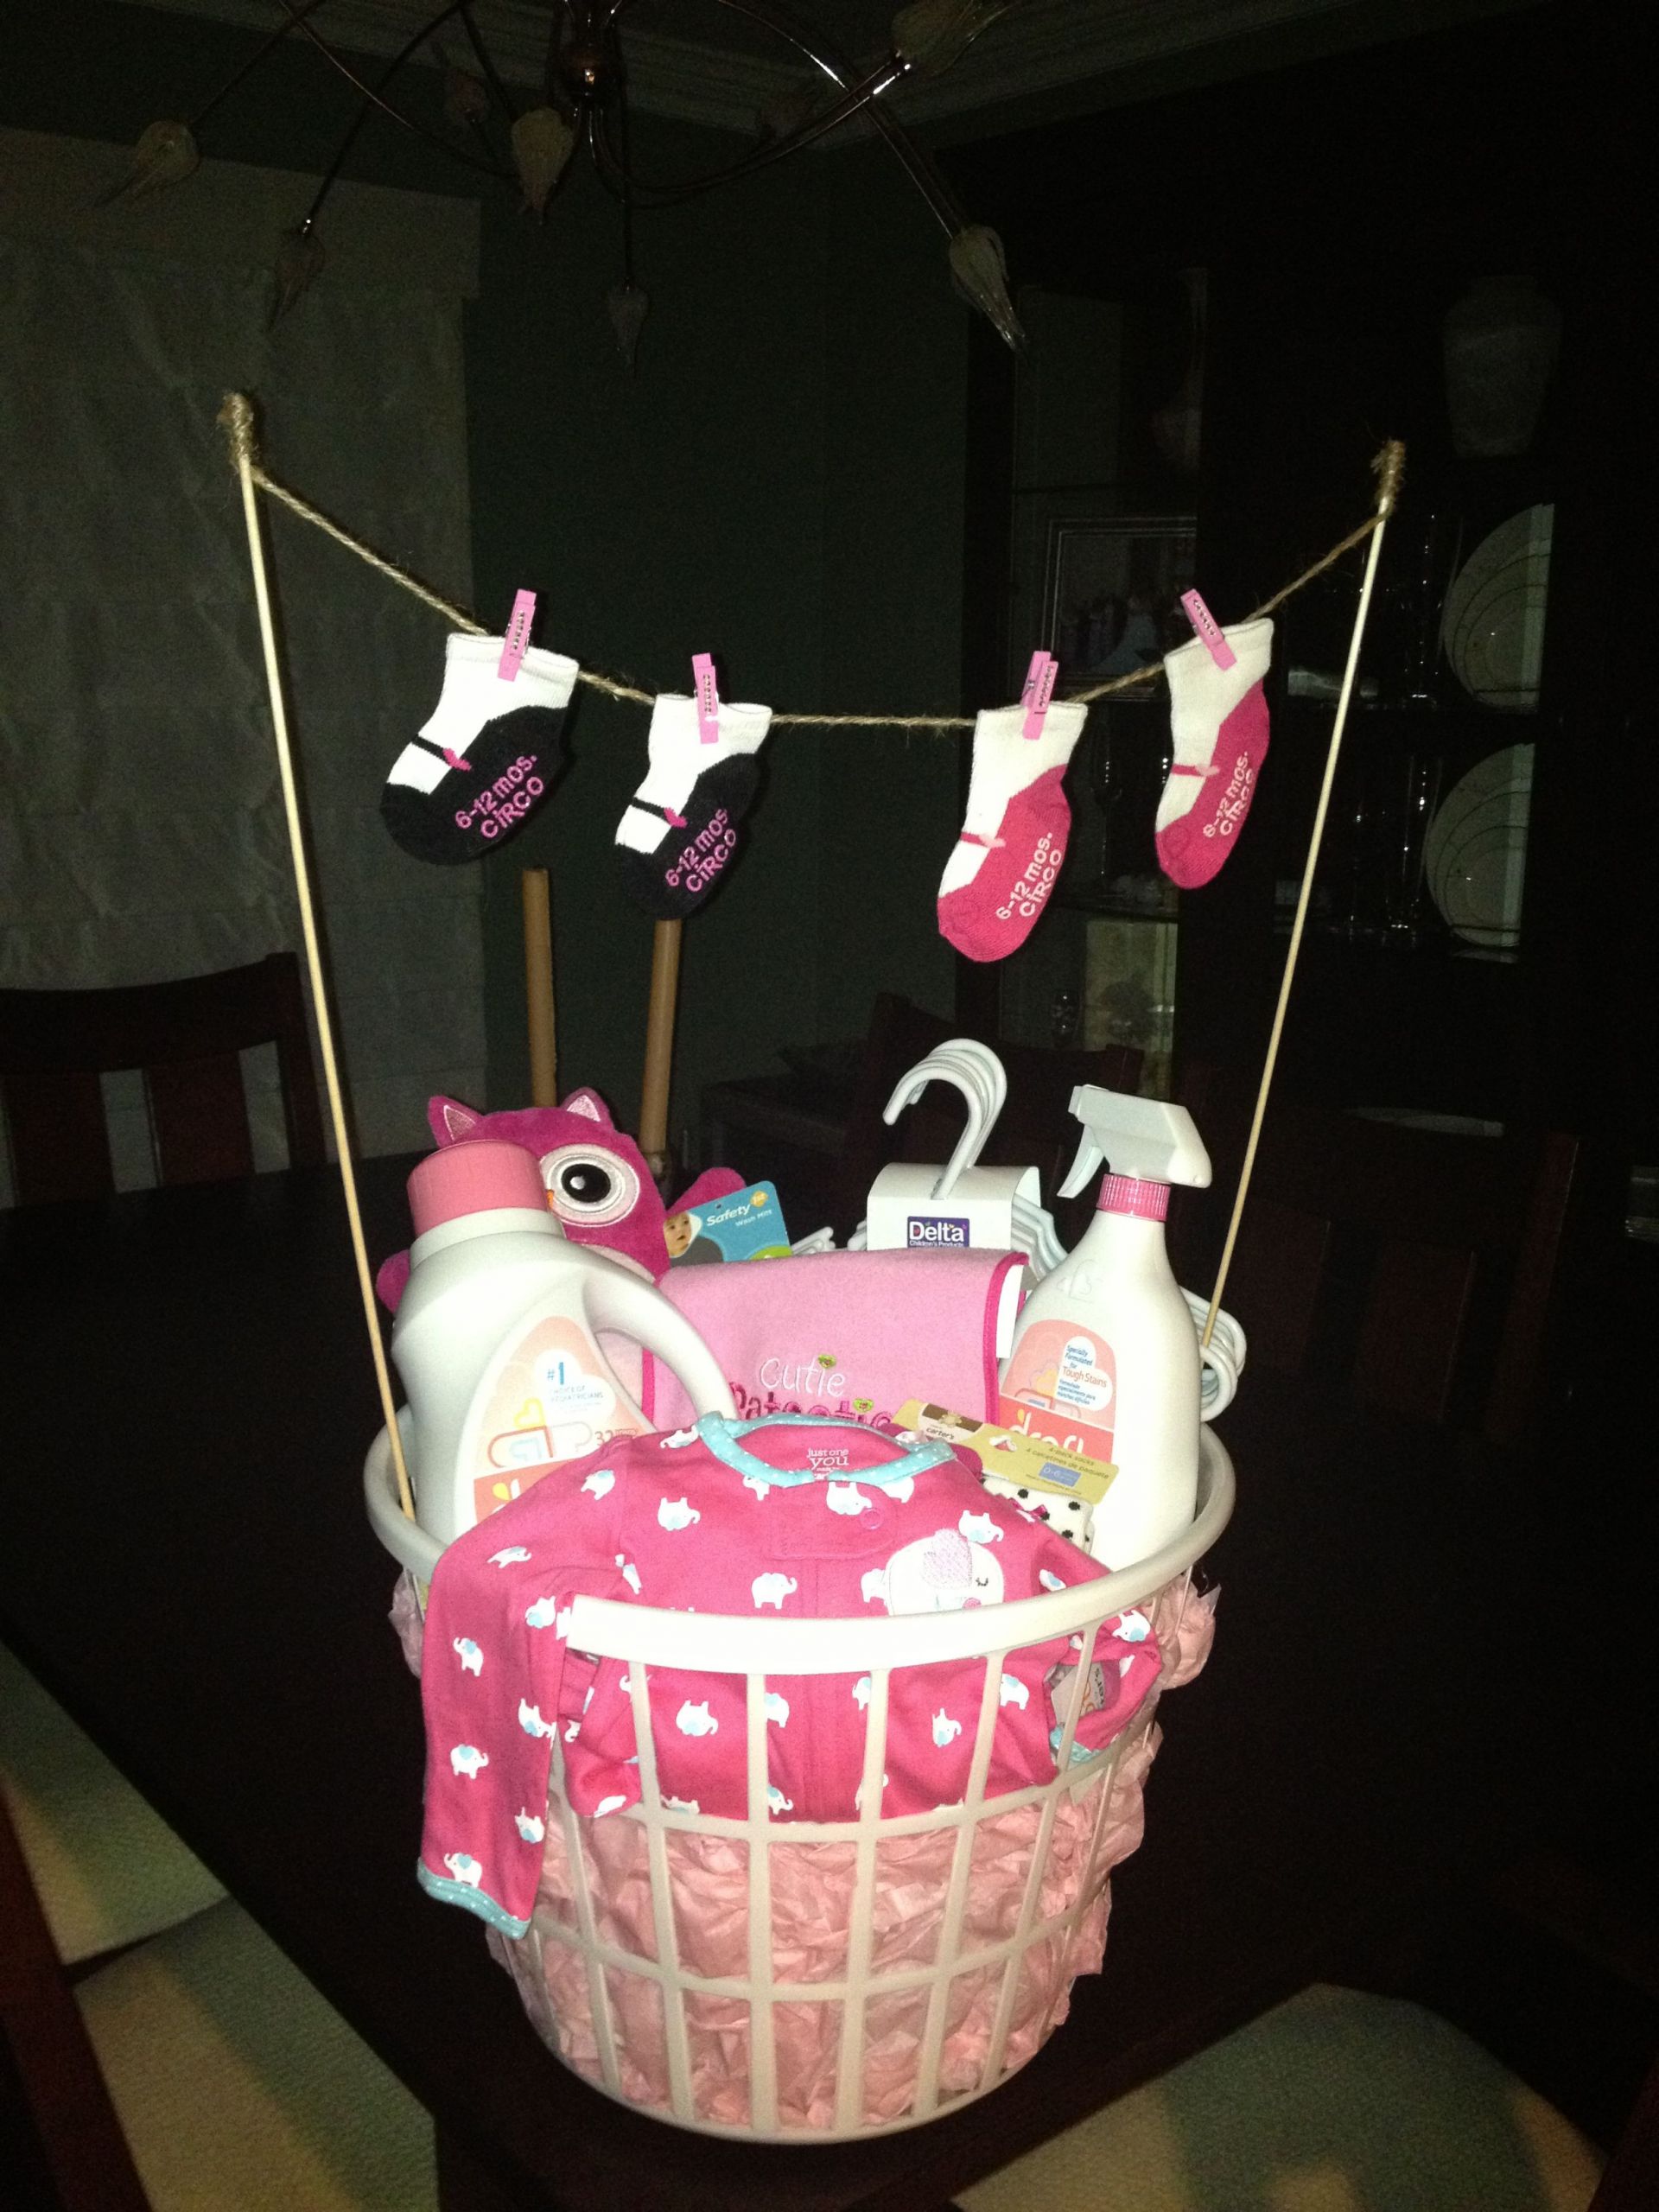 DIY Baby Shower Baskets
 Laundry basket baby shower t Baby Gifts